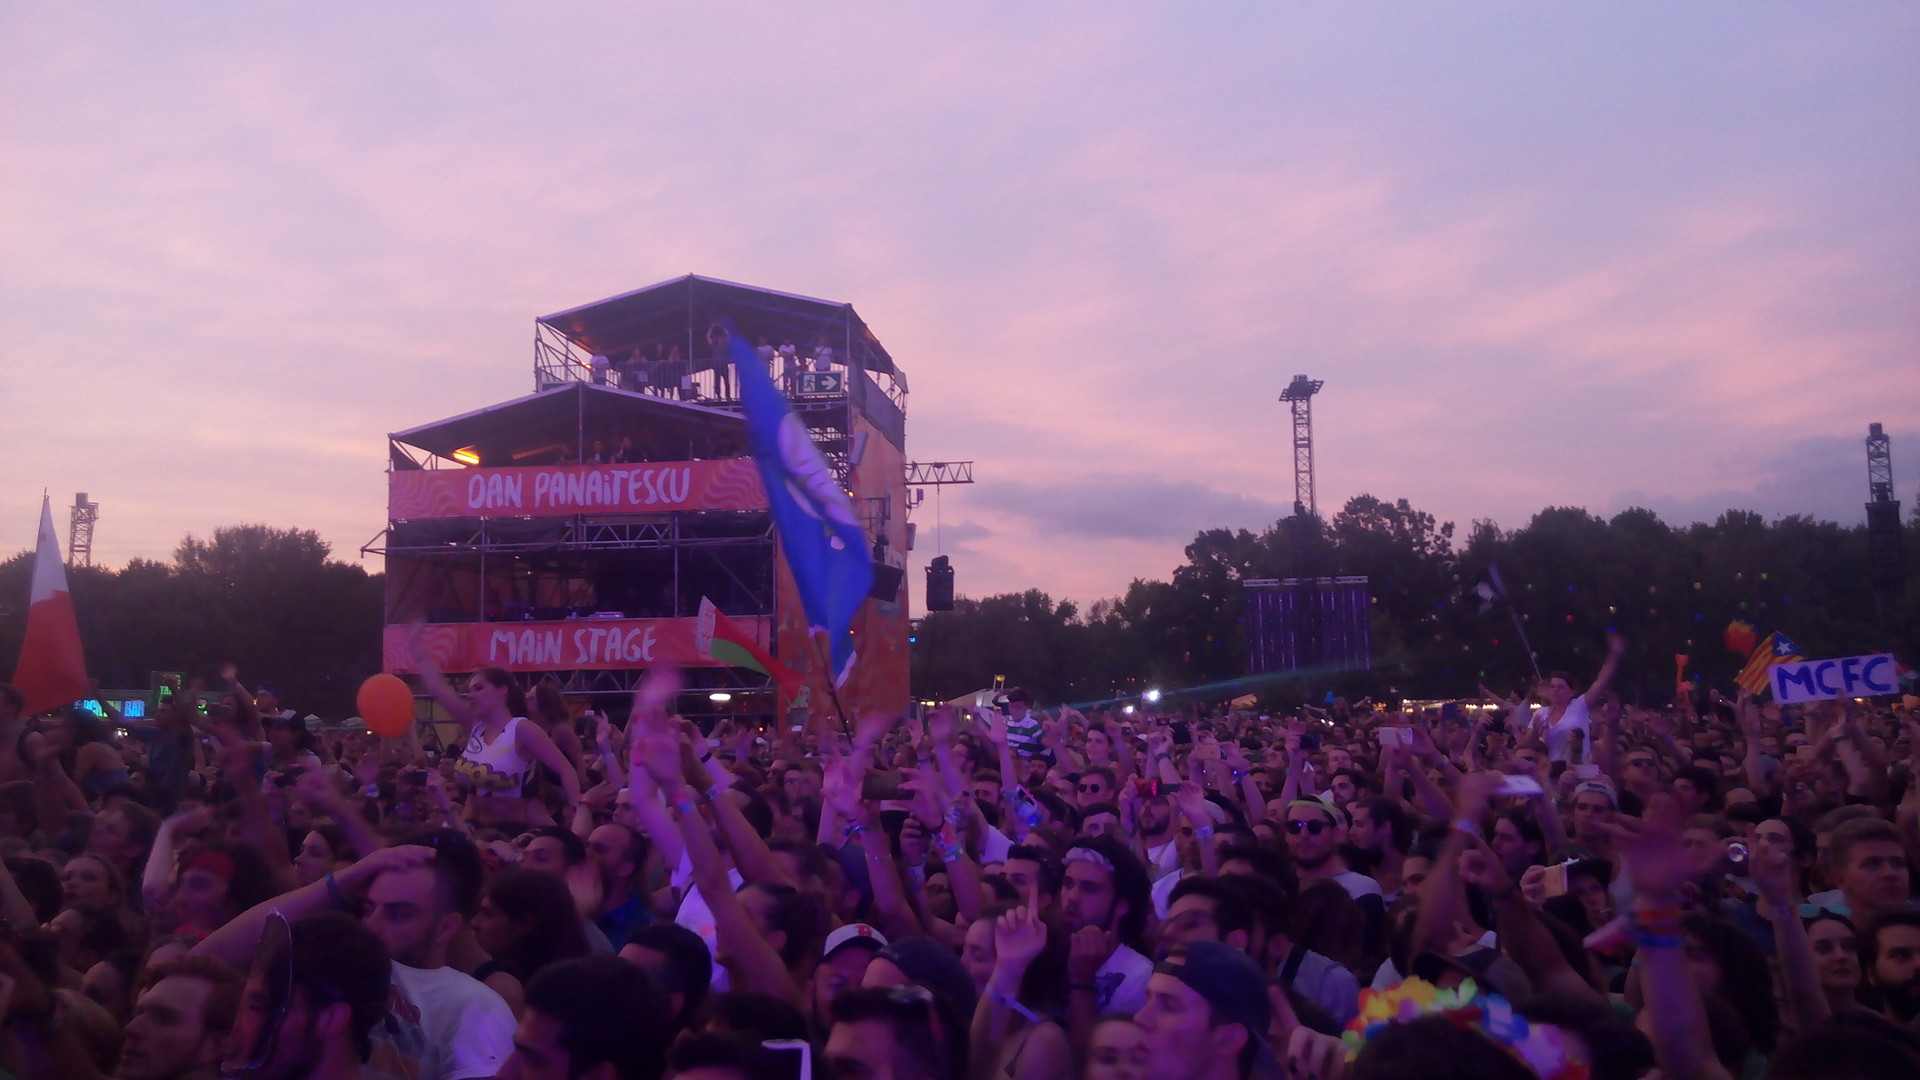 sziget-festival-d045ede7442f87640ae07058